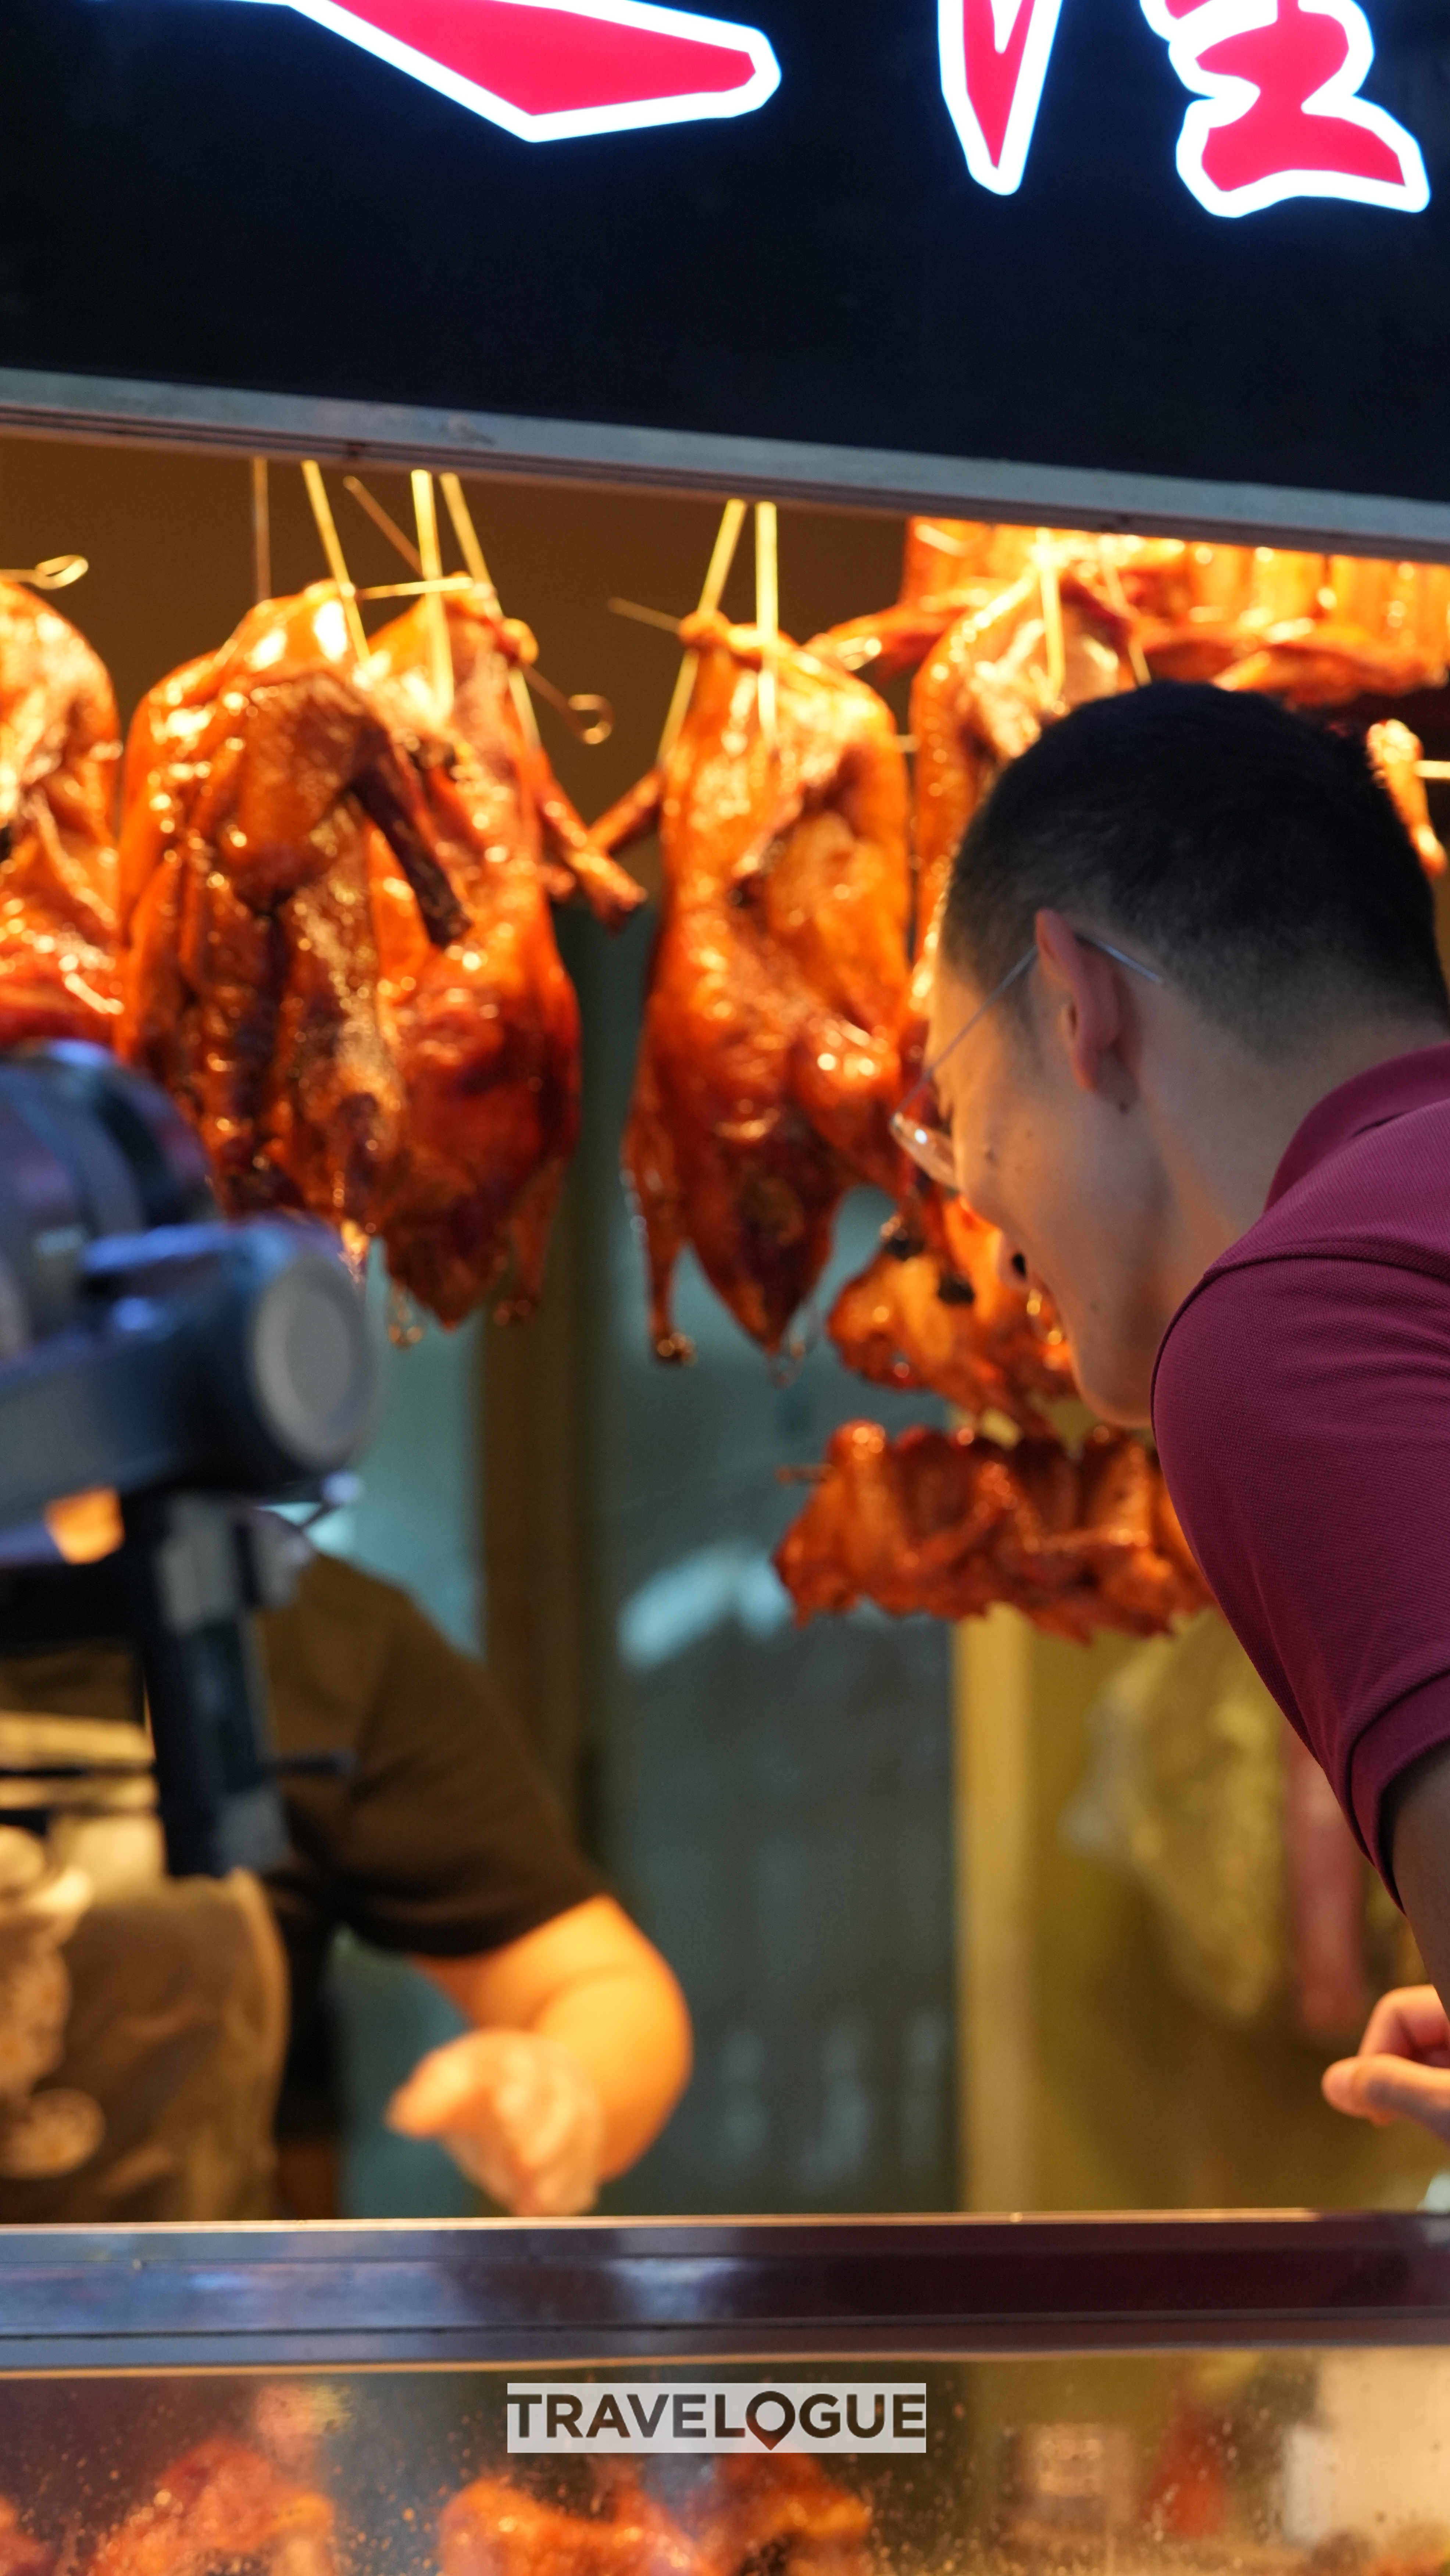 CGTN host He Tianran inquires about the price of roast duck at a local market in Shantou, Guangdong Province. /CGTN